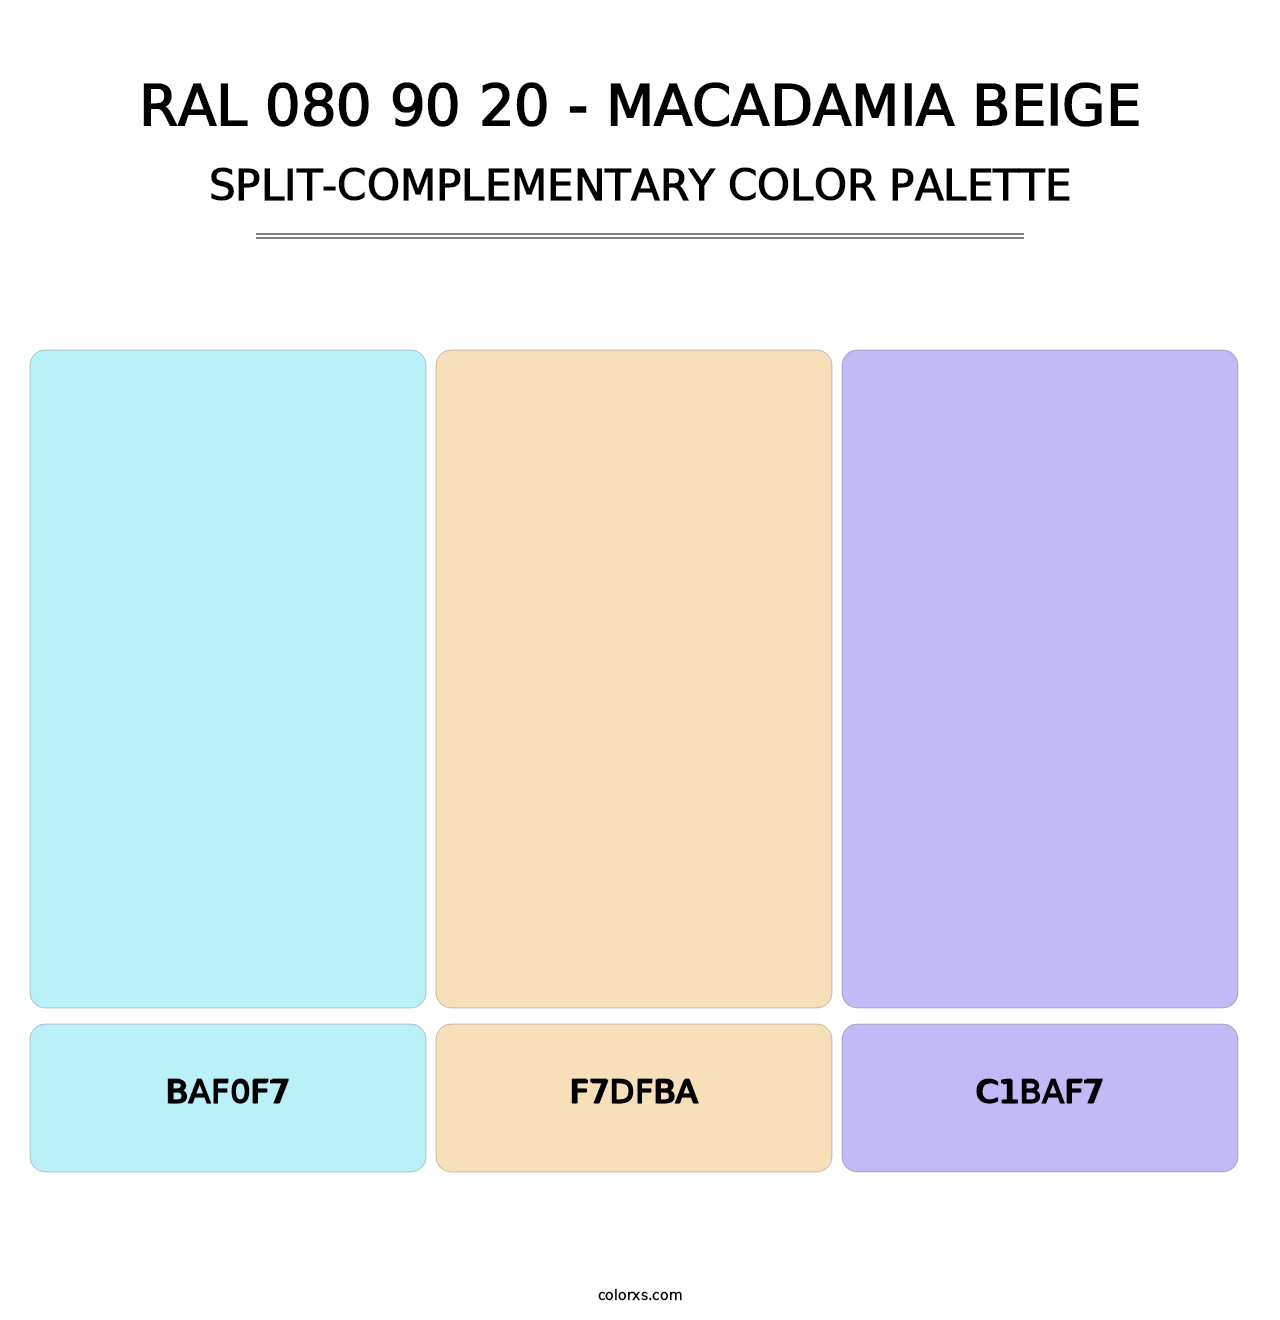 RAL 080 90 20 - Macadamia Beige - Split-Complementary Color Palette